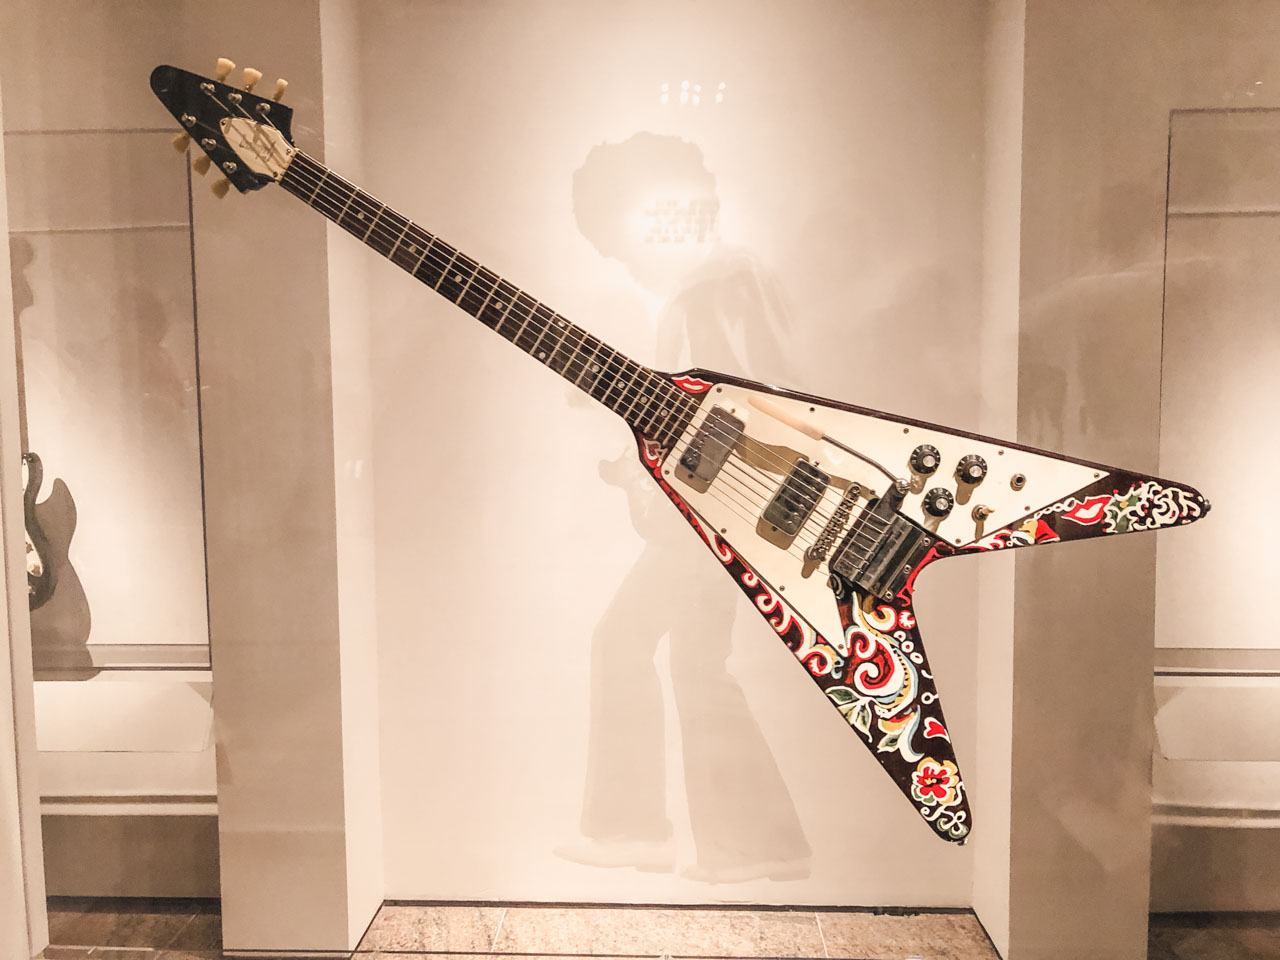 A guitar of Jimi Hendrix on display at The Met